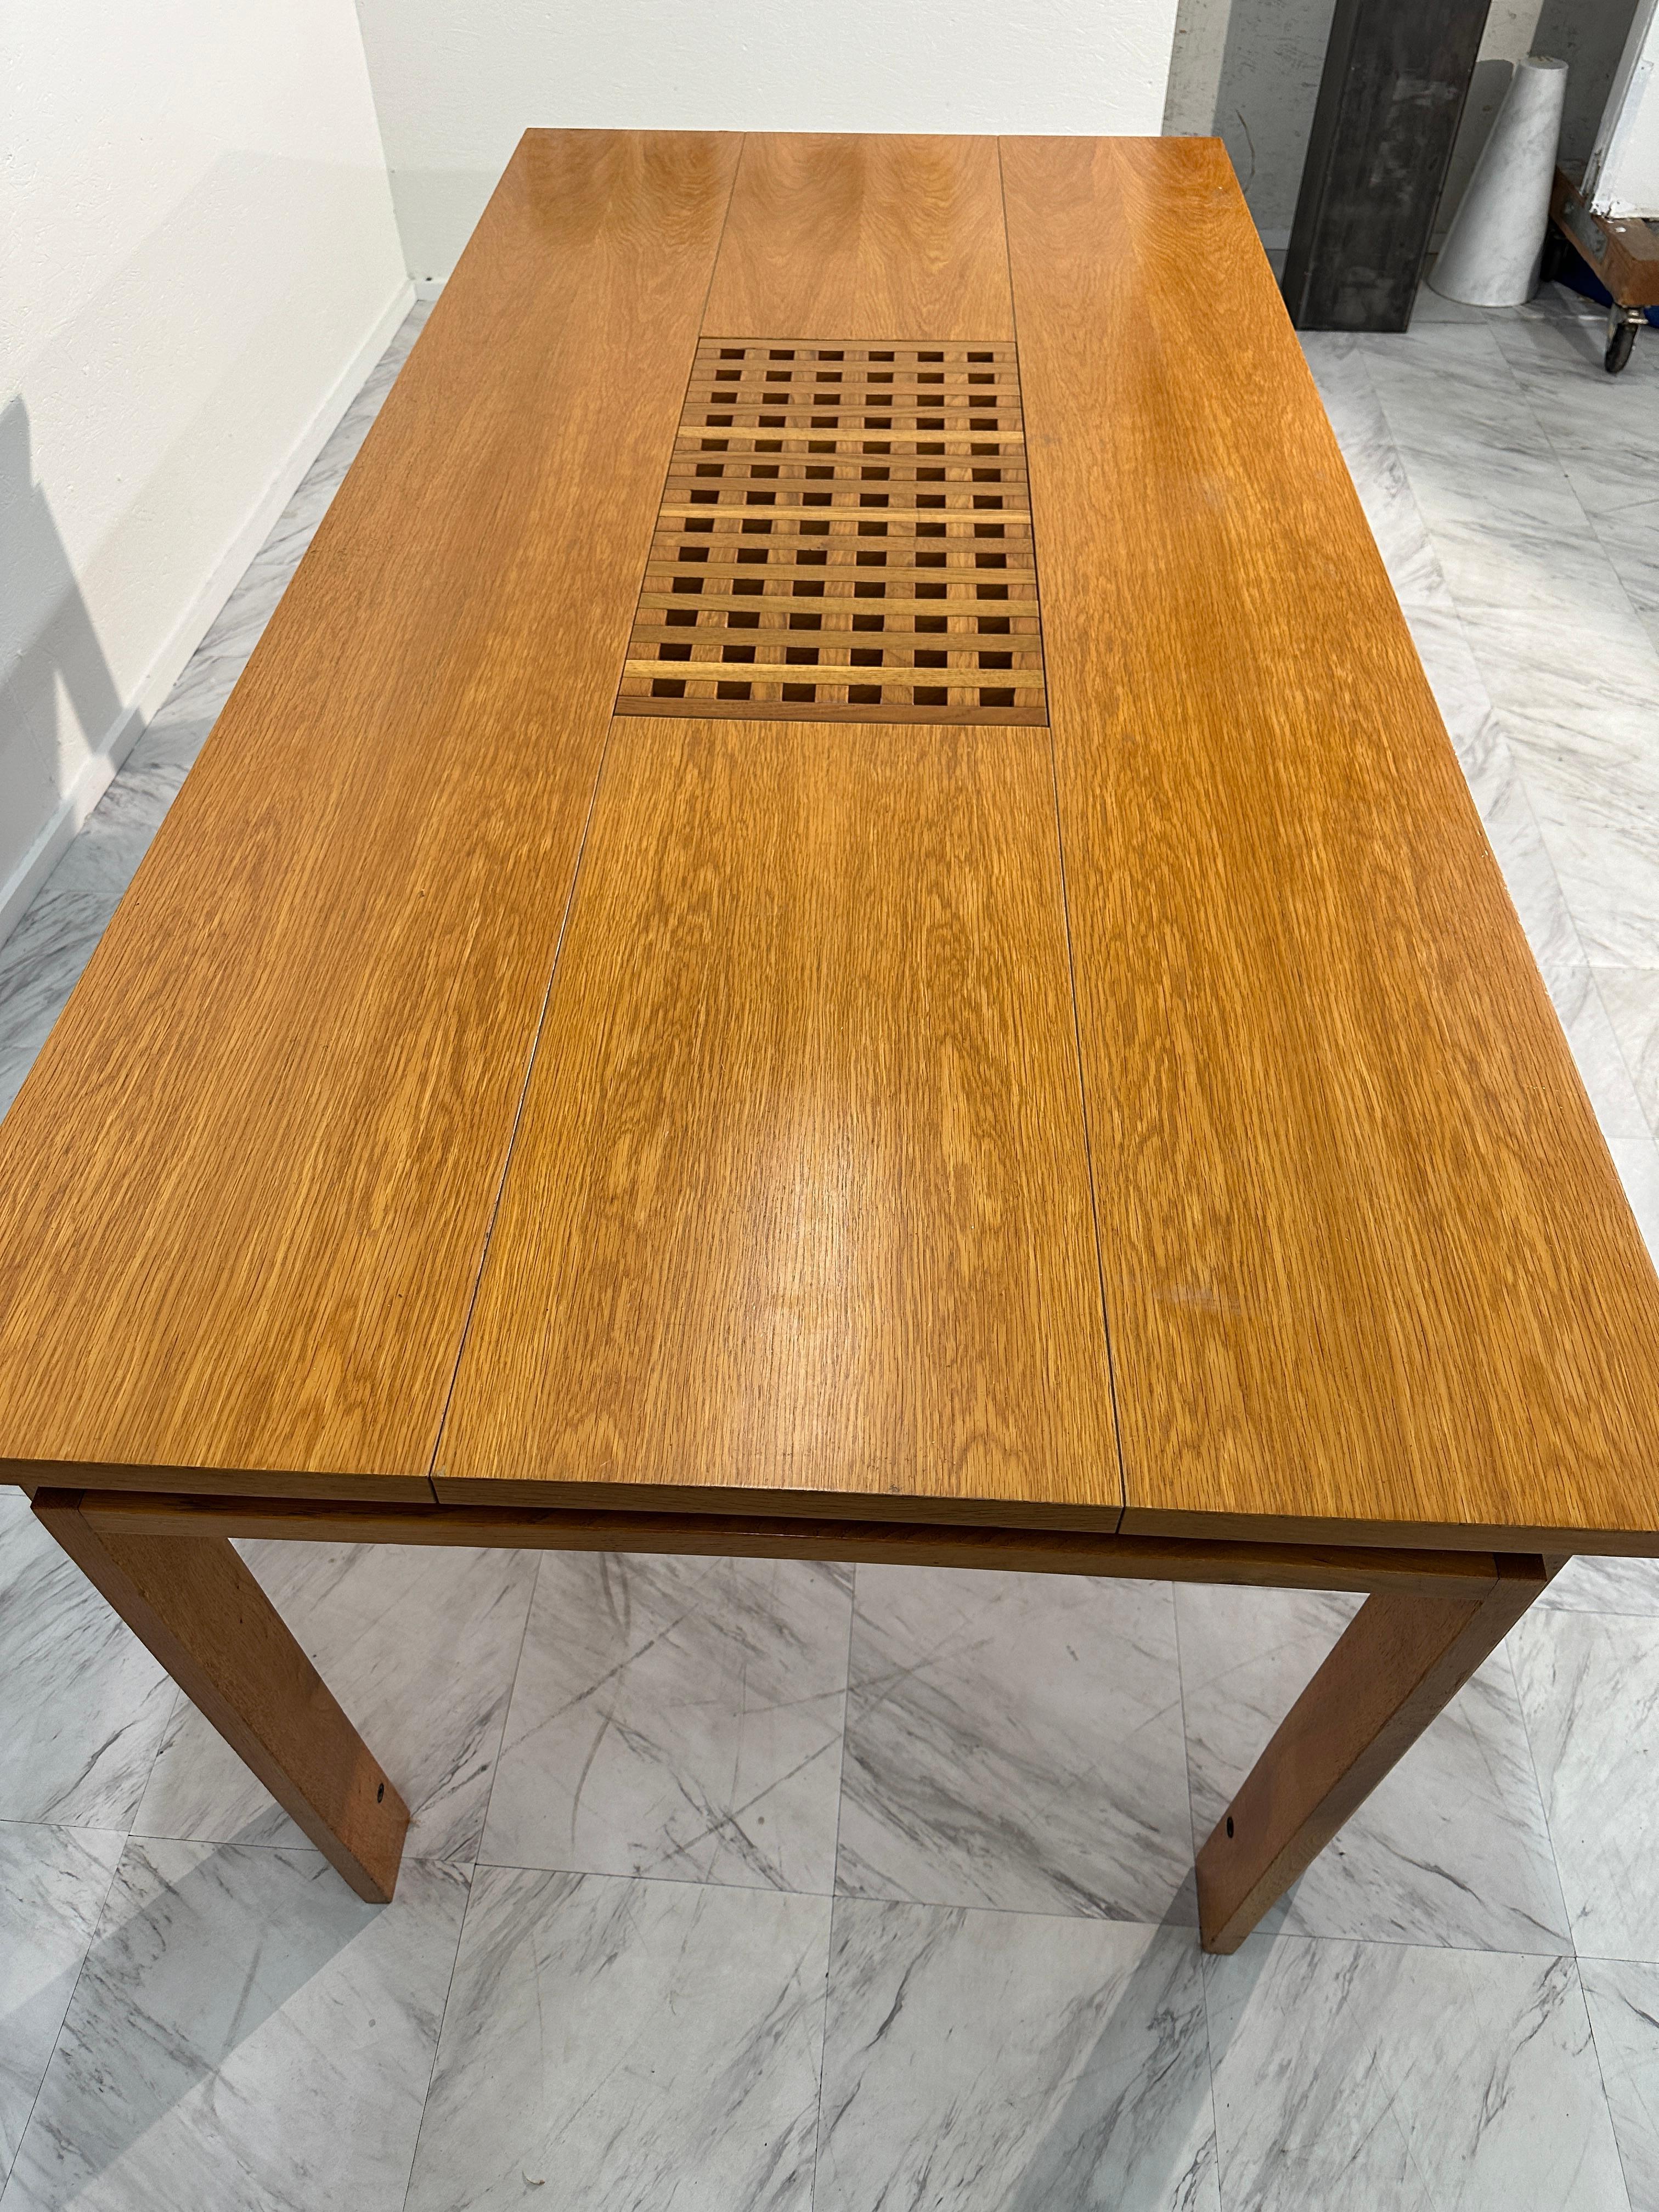 Wood Mid Century Italian Dining Table by Pozzi & Verga 1960s For Sale